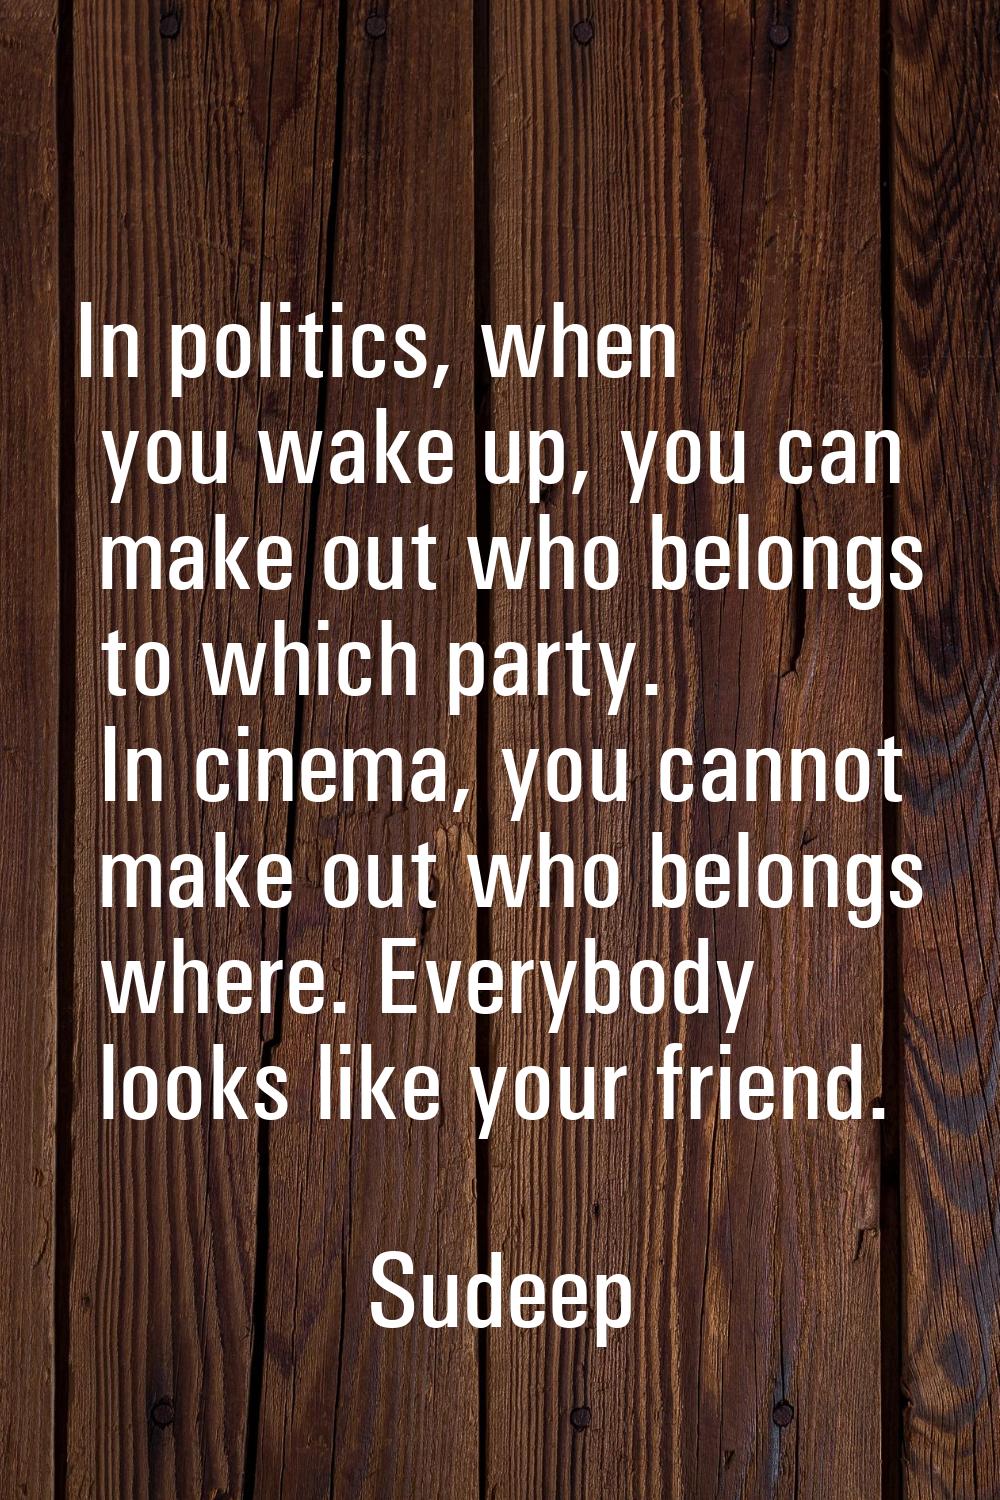 In politics, when you wake up, you can make out who belongs to which party. In cinema, you cannot m